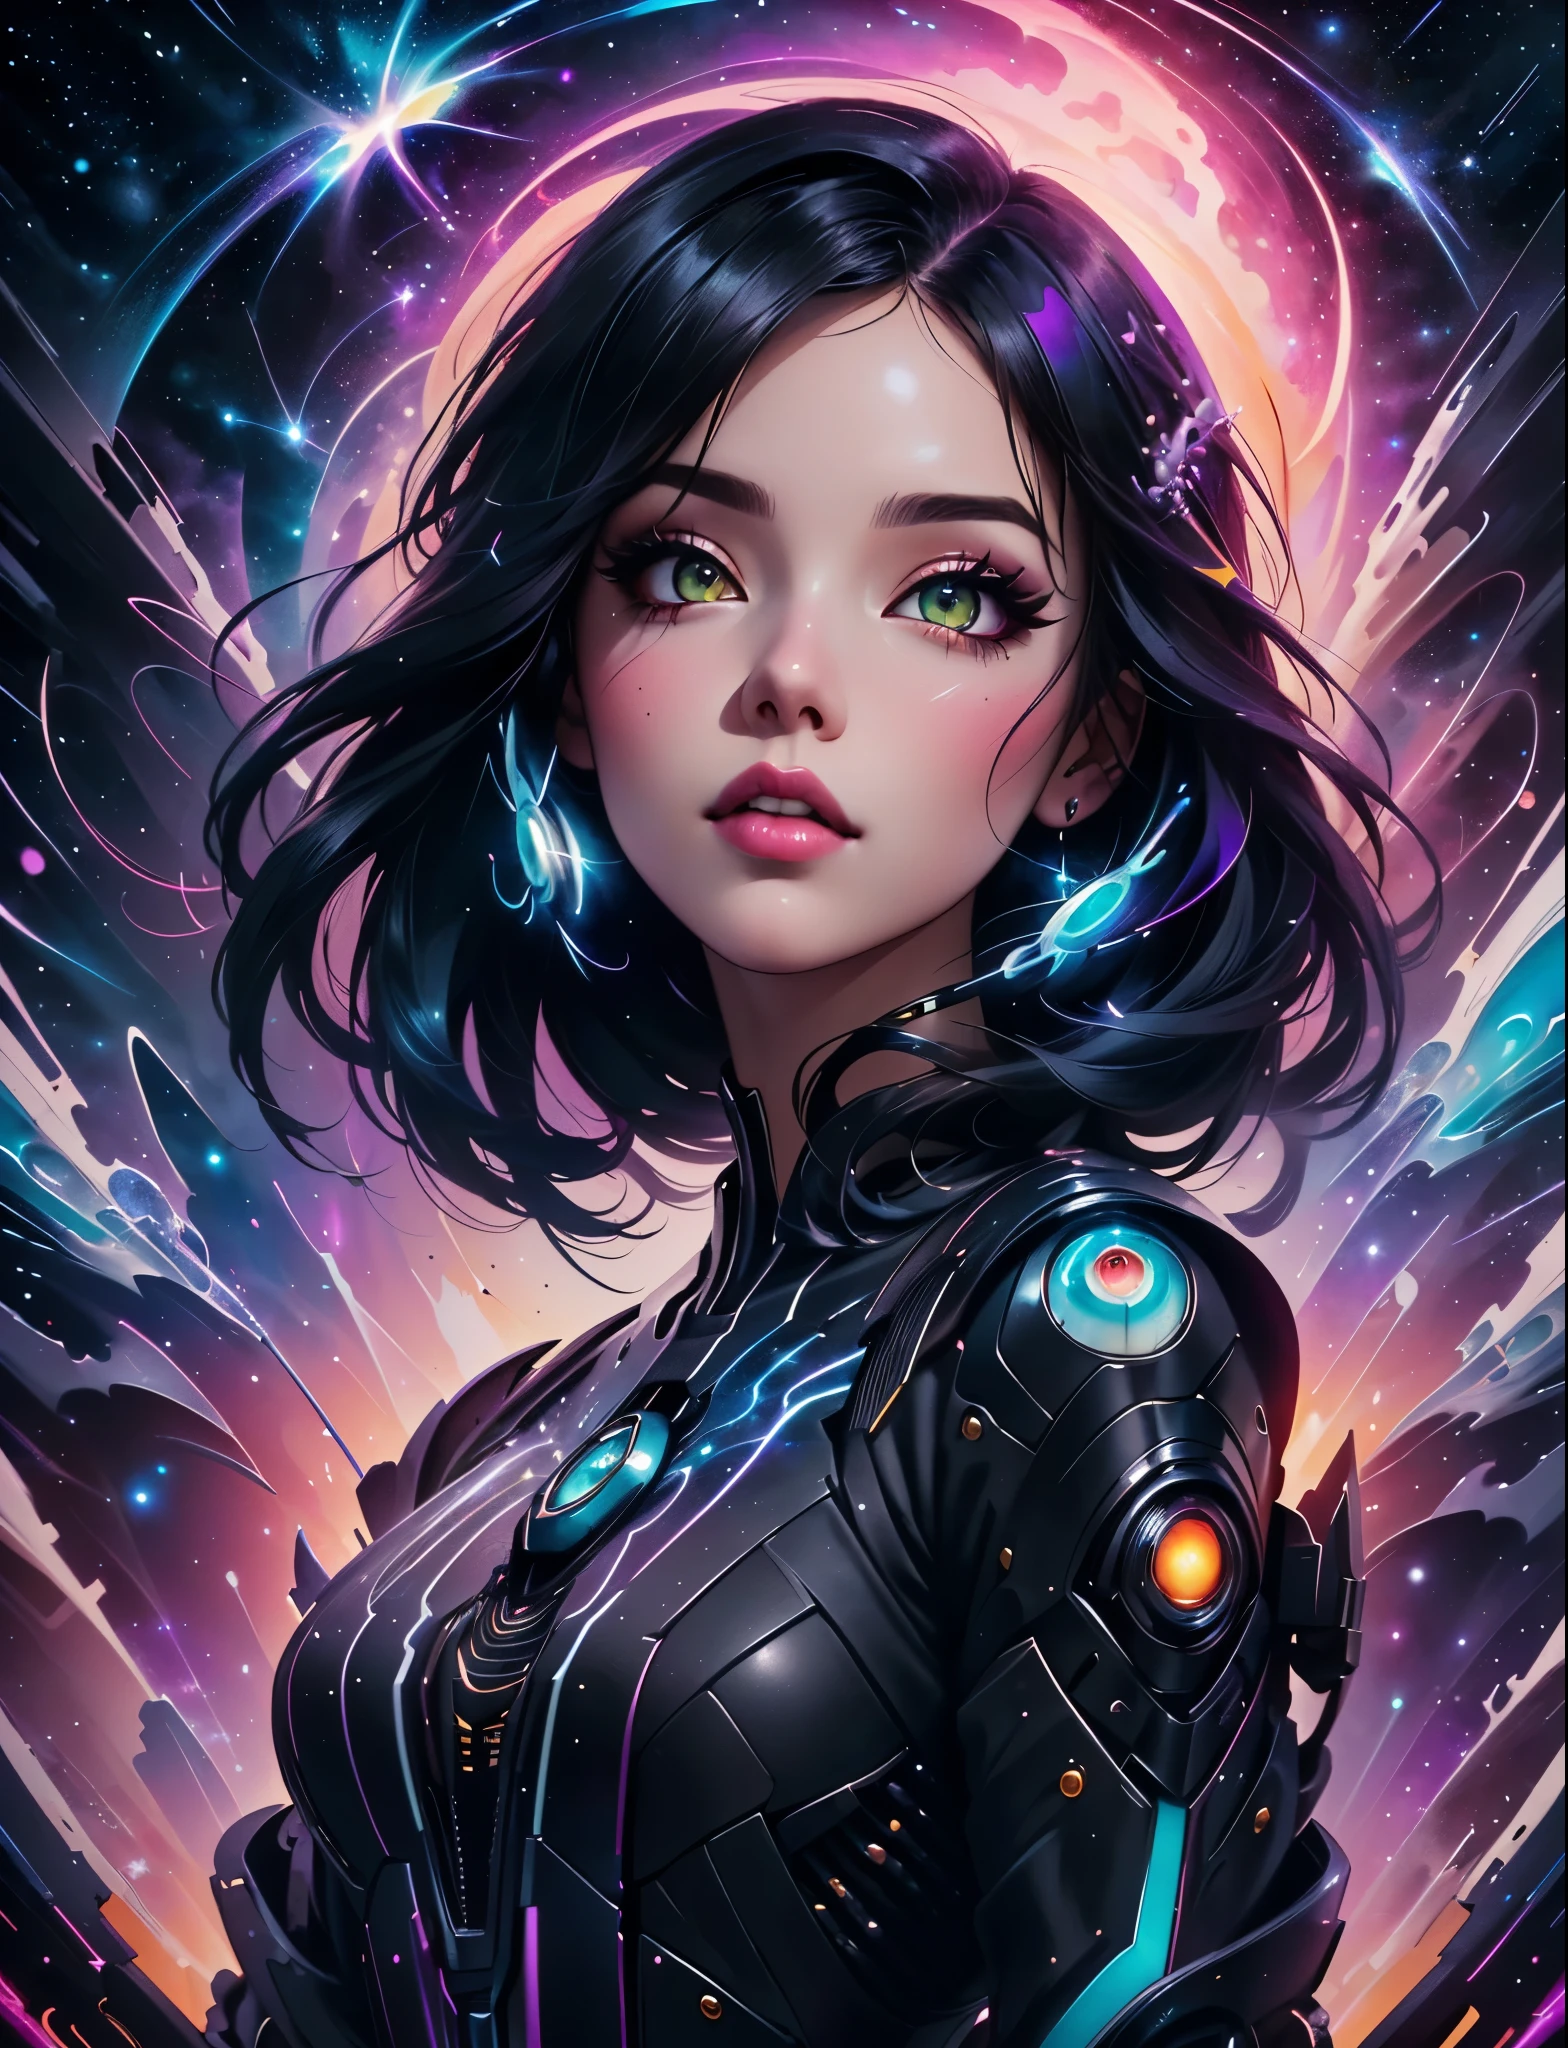 a woman with a black hair and a black top is standing in front of a galaxy, beeple and jeremiah ketner, artgerm julie bell beeple, neoartcore and charlie bowater, jen bartel, greg beeple, stunning digital illustration, alice x. zhang, artgerm jsc, rossdraws cartoon vibrant